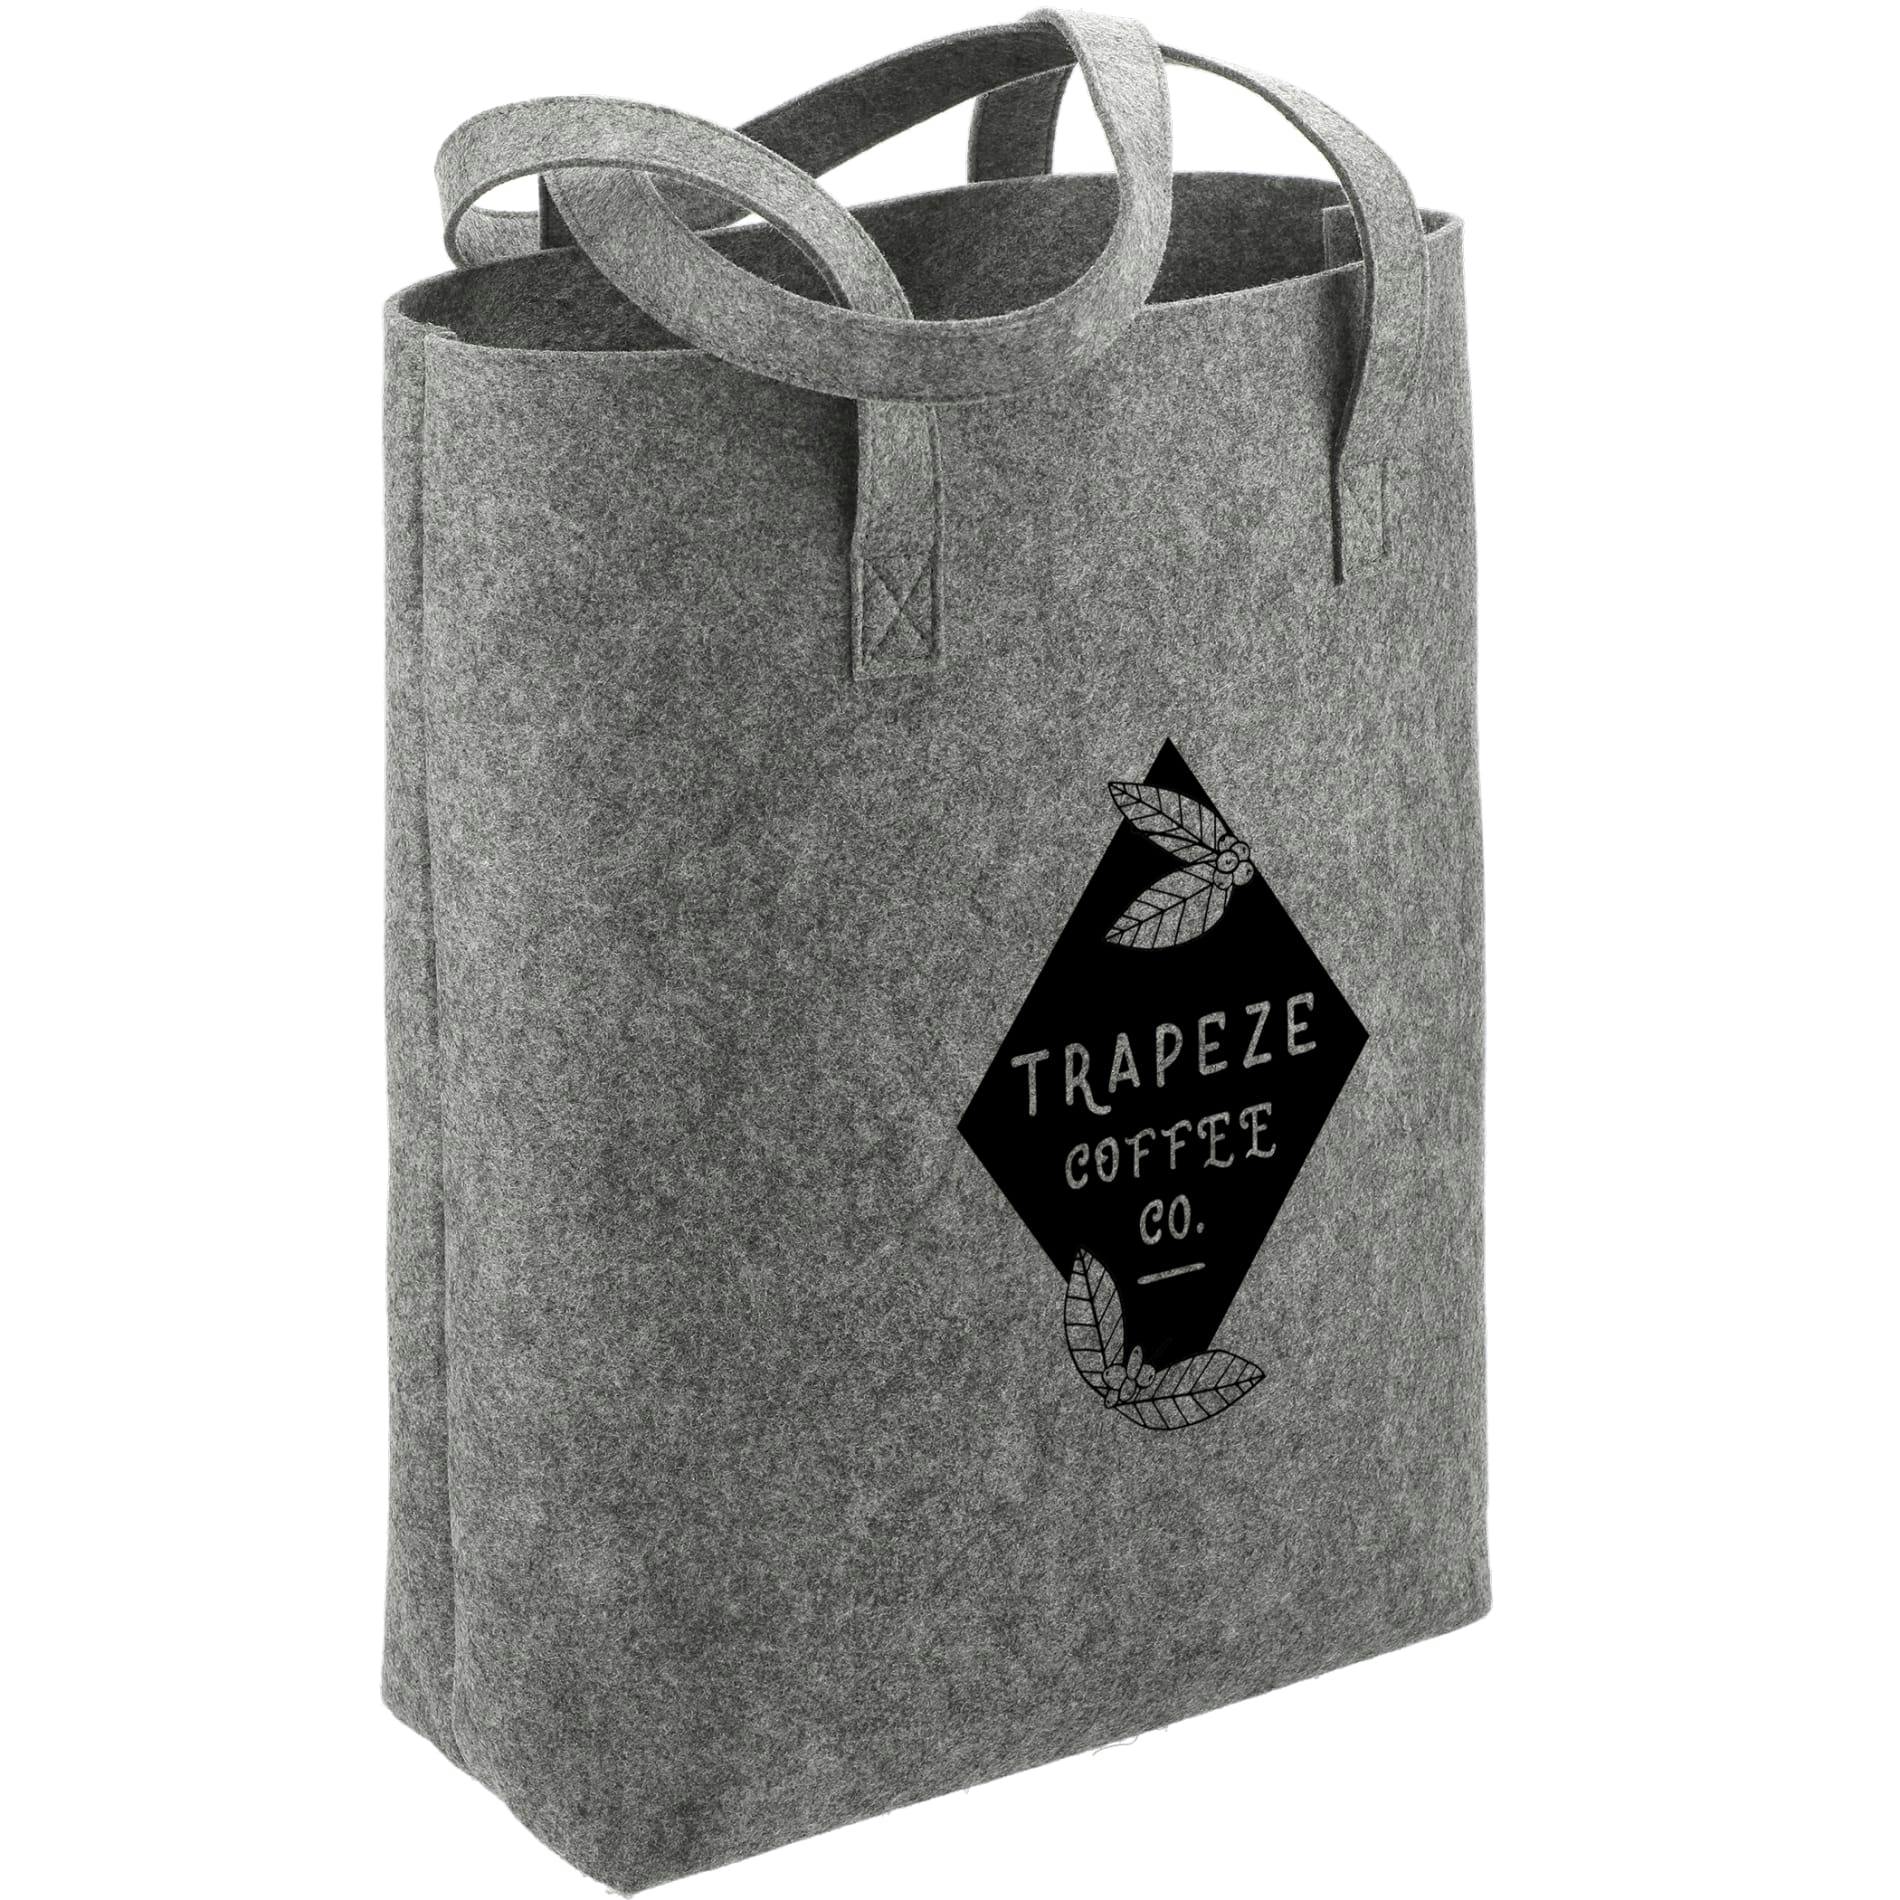 Recycled Felt Shopper Tote - additional Image 4